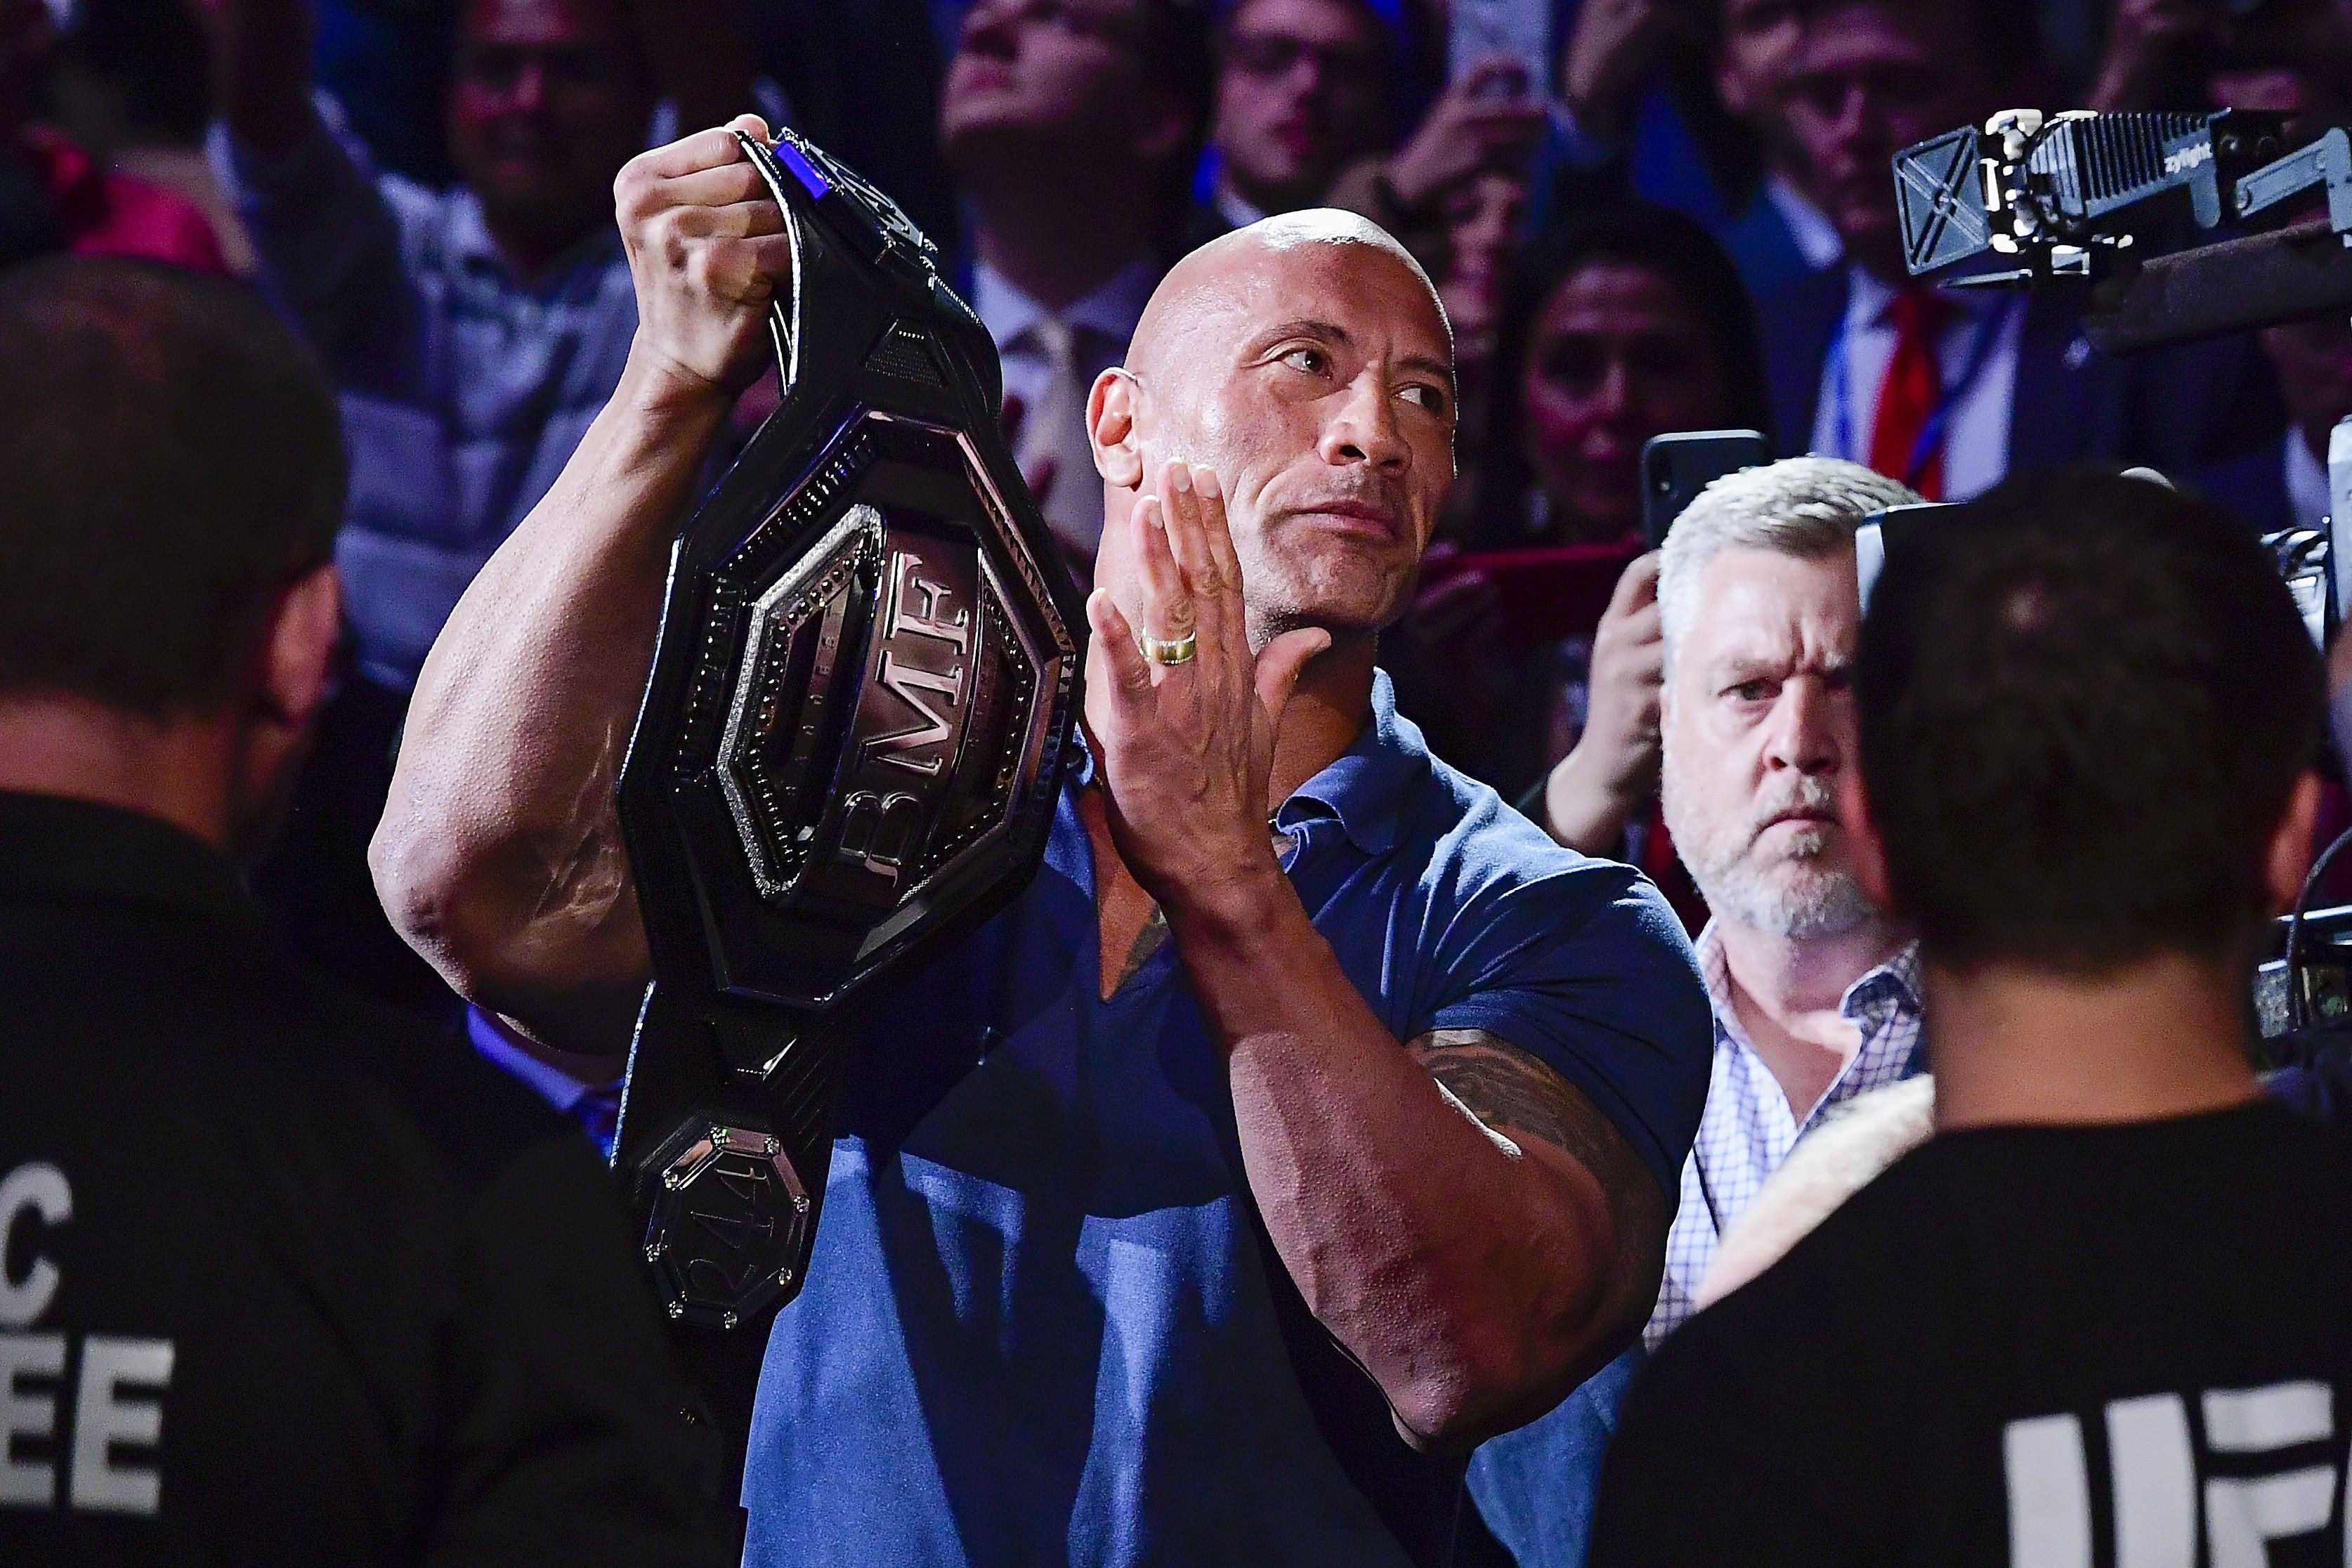 Dwayne “The Rock” Johnson holds the ‘BMF’ belt for the bout between Jorge Masvidal and Nate Diaz at UFC 244 at Madison Square Garden. Photo: AFP